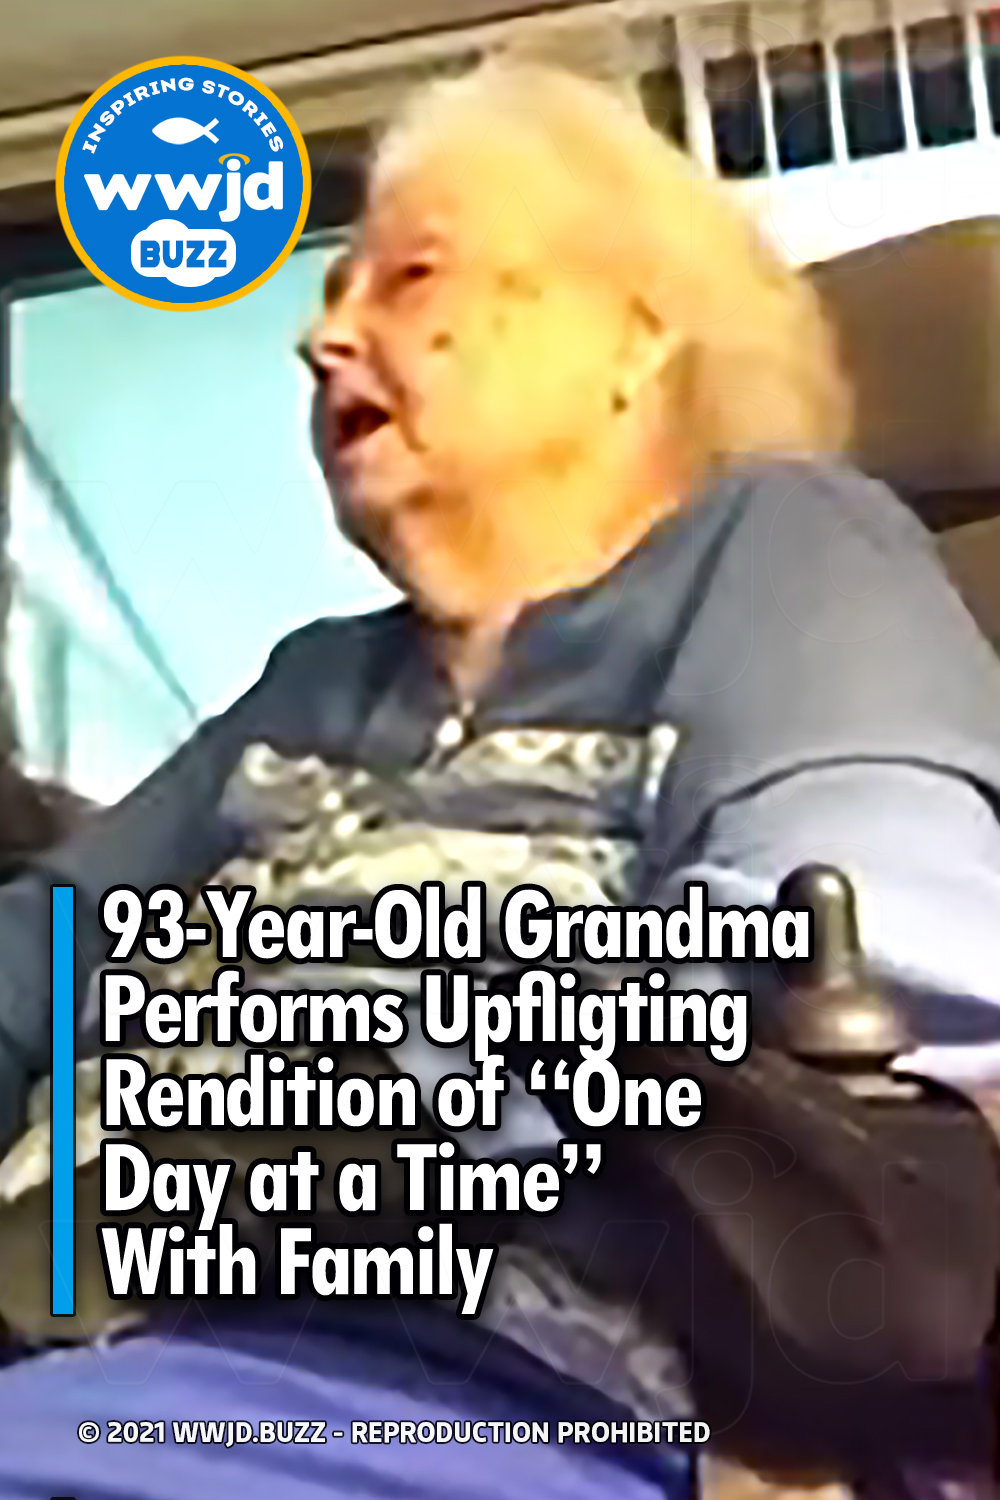 93-Year-Old Grandma Performs Upfligting Rendition of “One Day at a Time” With Family